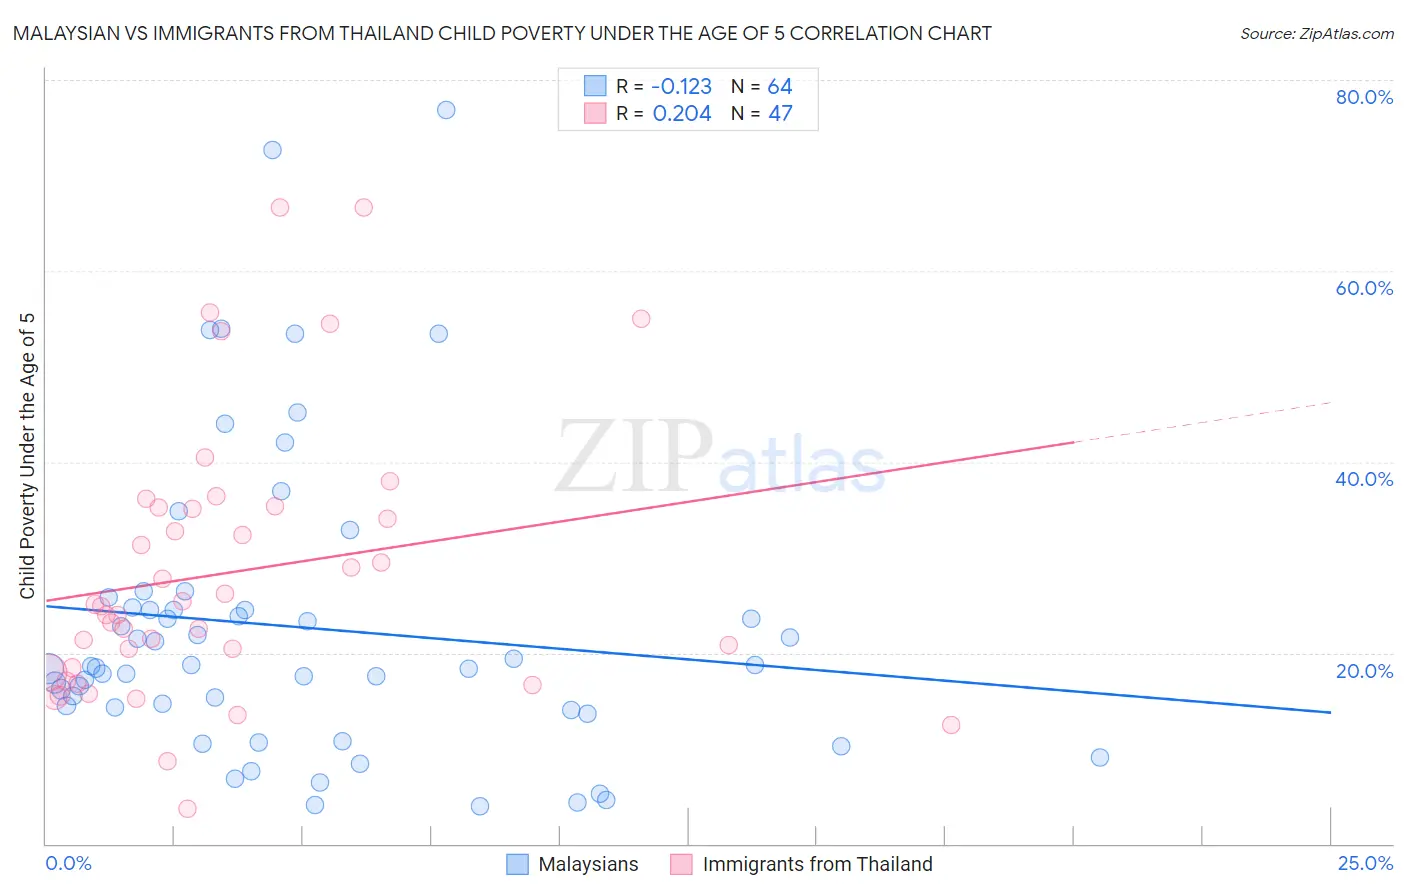 Malaysian vs Immigrants from Thailand Child Poverty Under the Age of 5